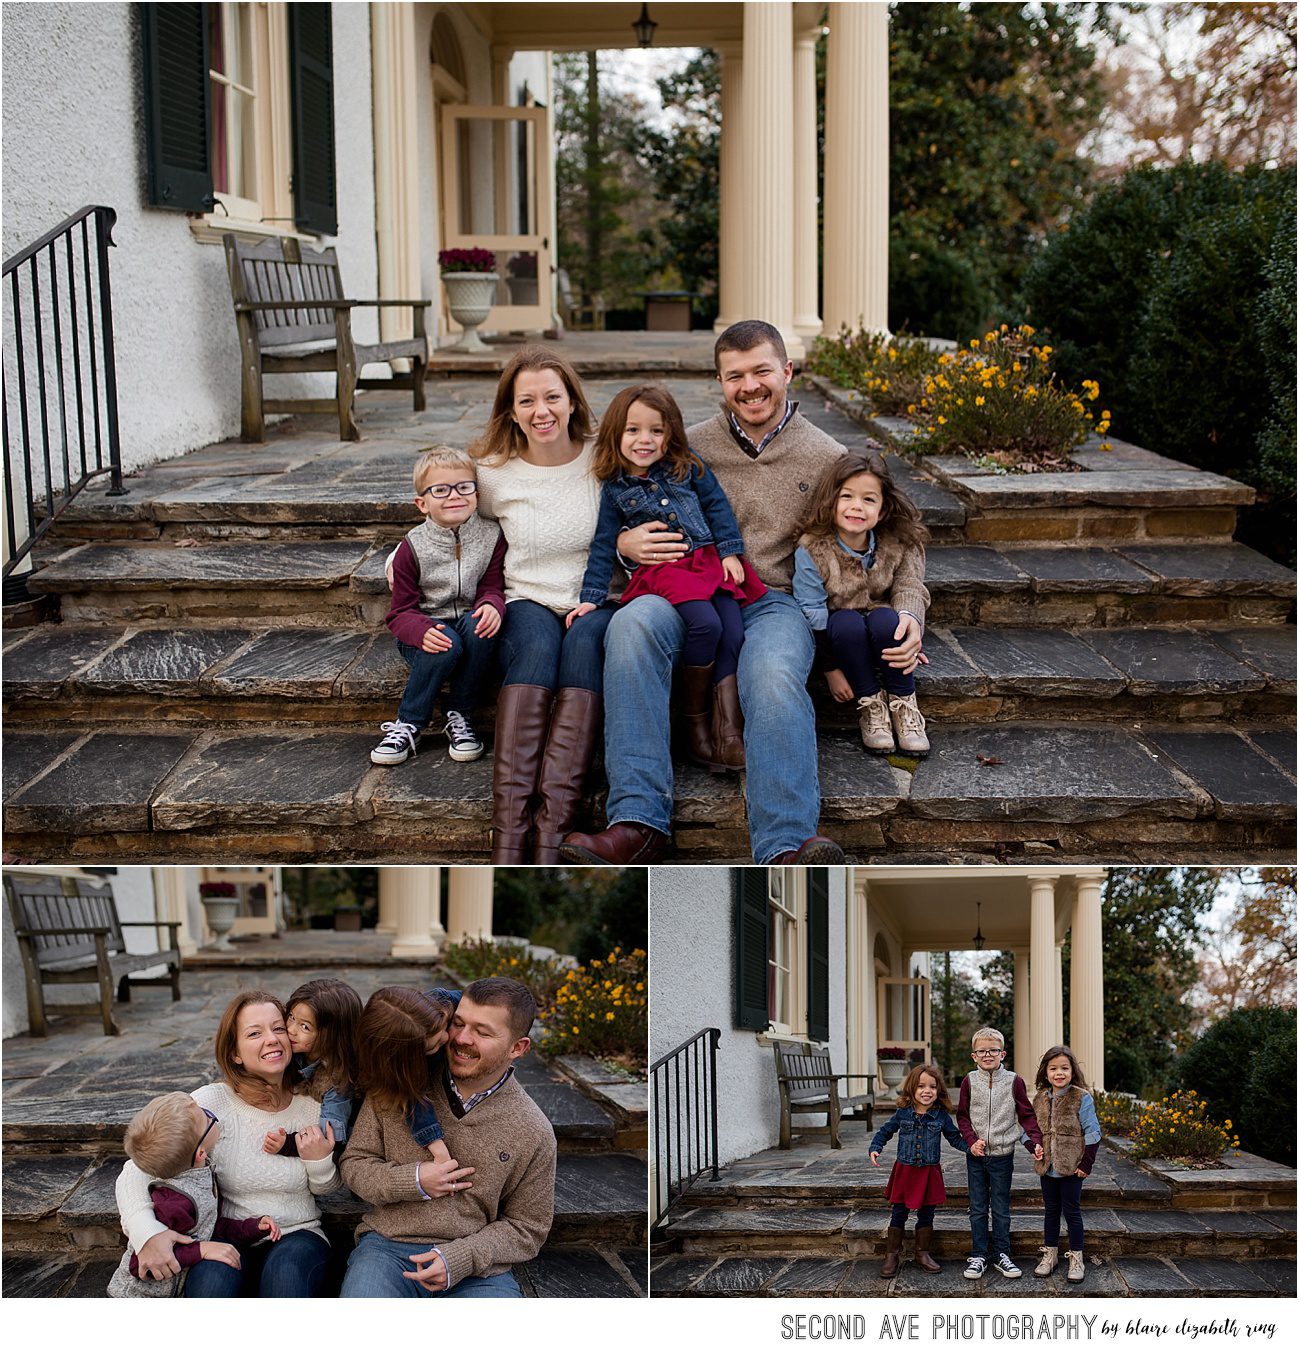 I've been their Loudoun County Photographer for years, since their twin girls were born. We met at my favorite spot for a fun family session.